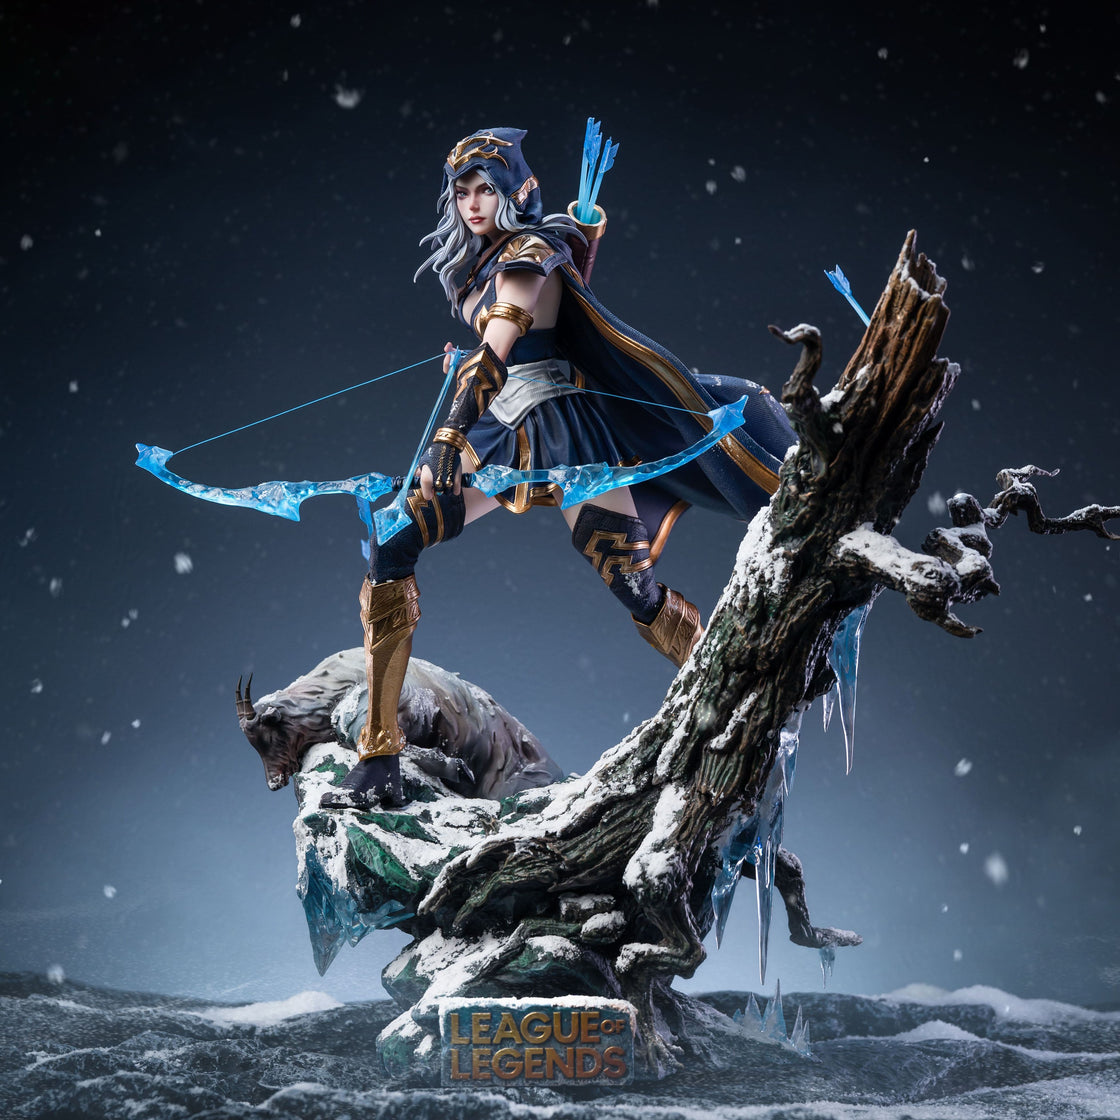 [Out of Stock] JiMei Palace League of Legends Ashe Statue